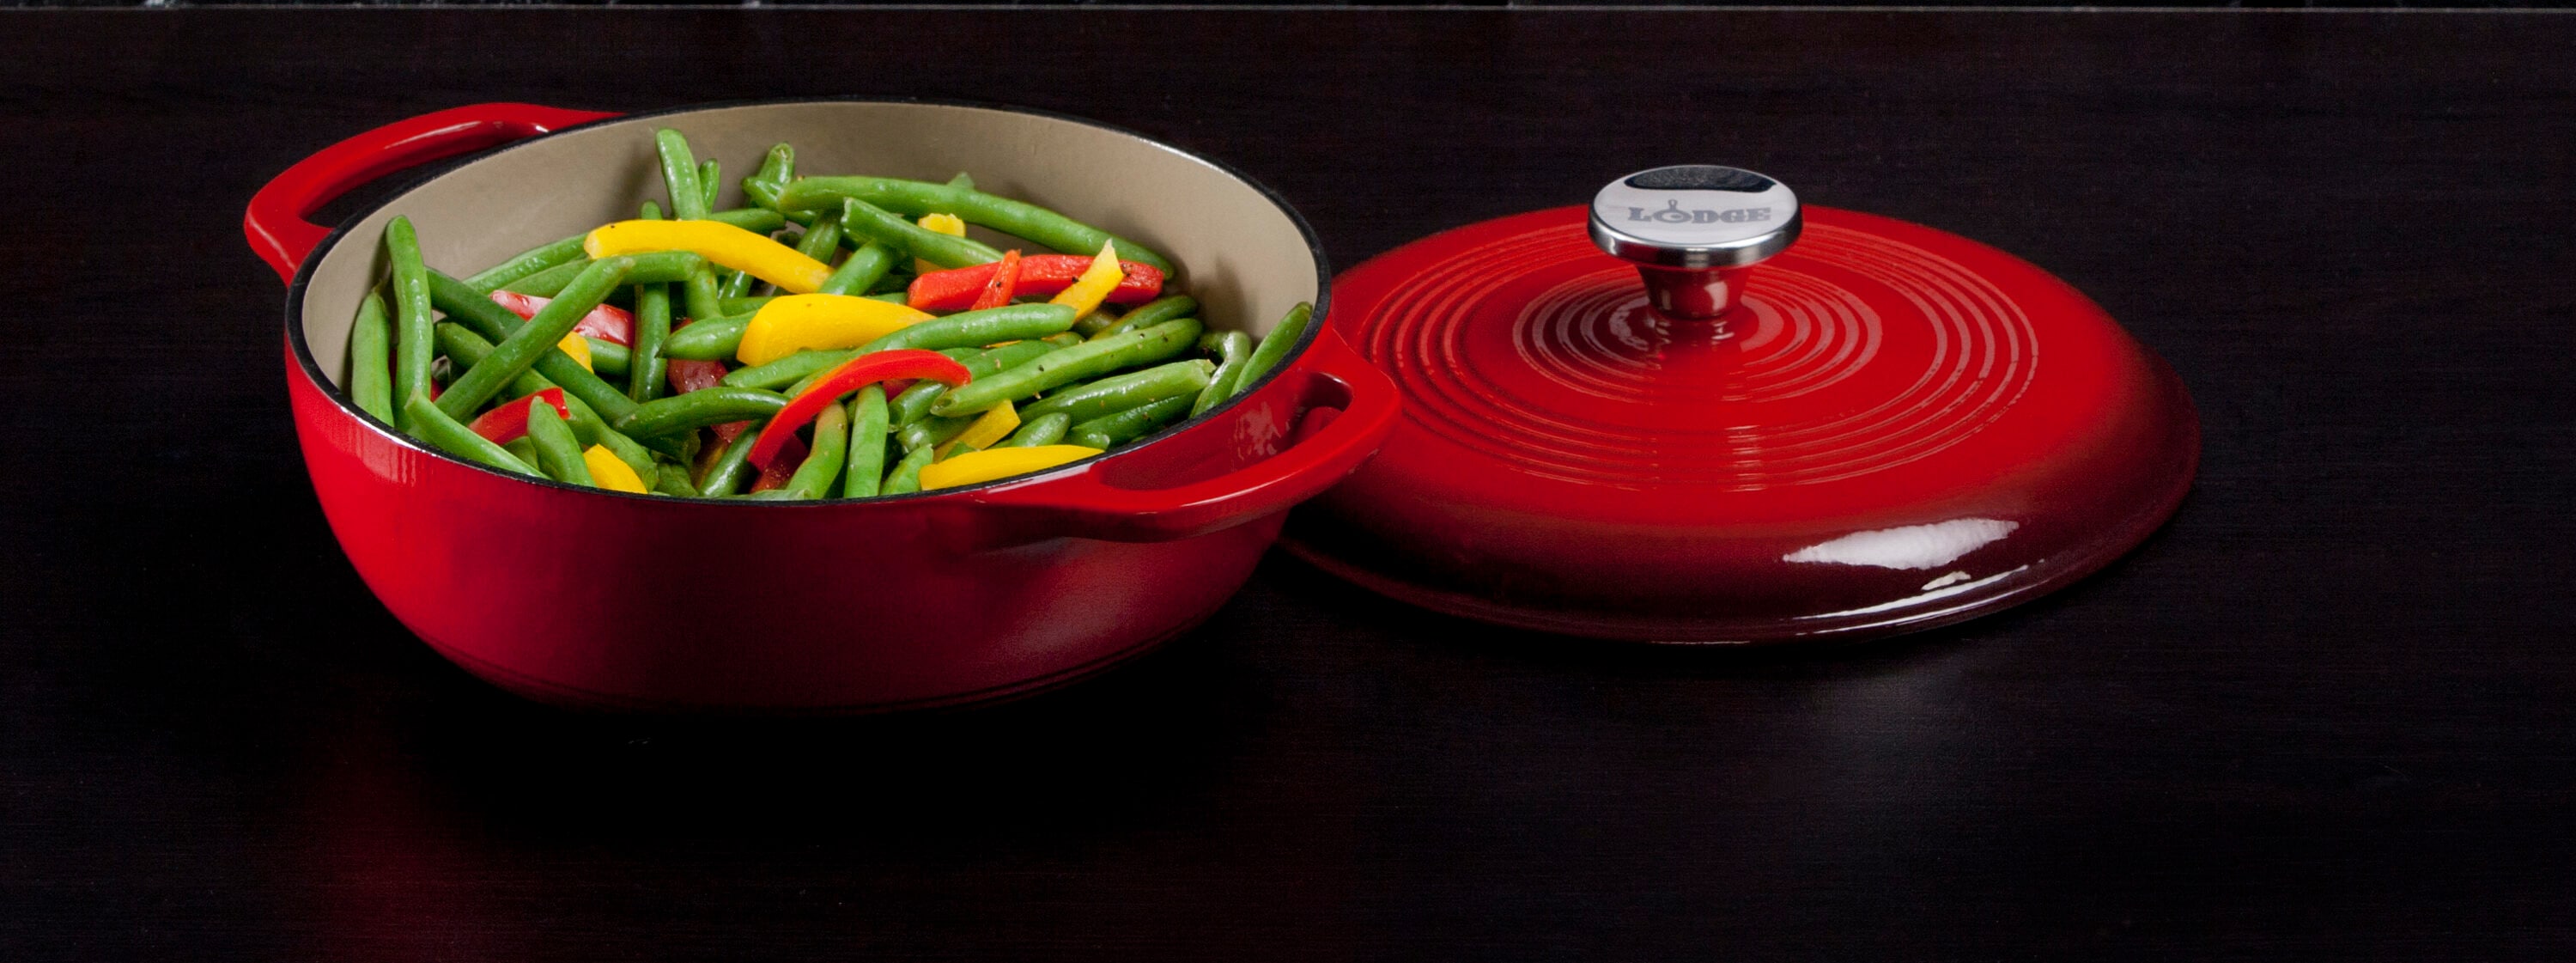 Lodge Cast Iron Red Silicone Cooking Pot Handle with Ergonomic Comfort Grip  - Lodge Compatible at